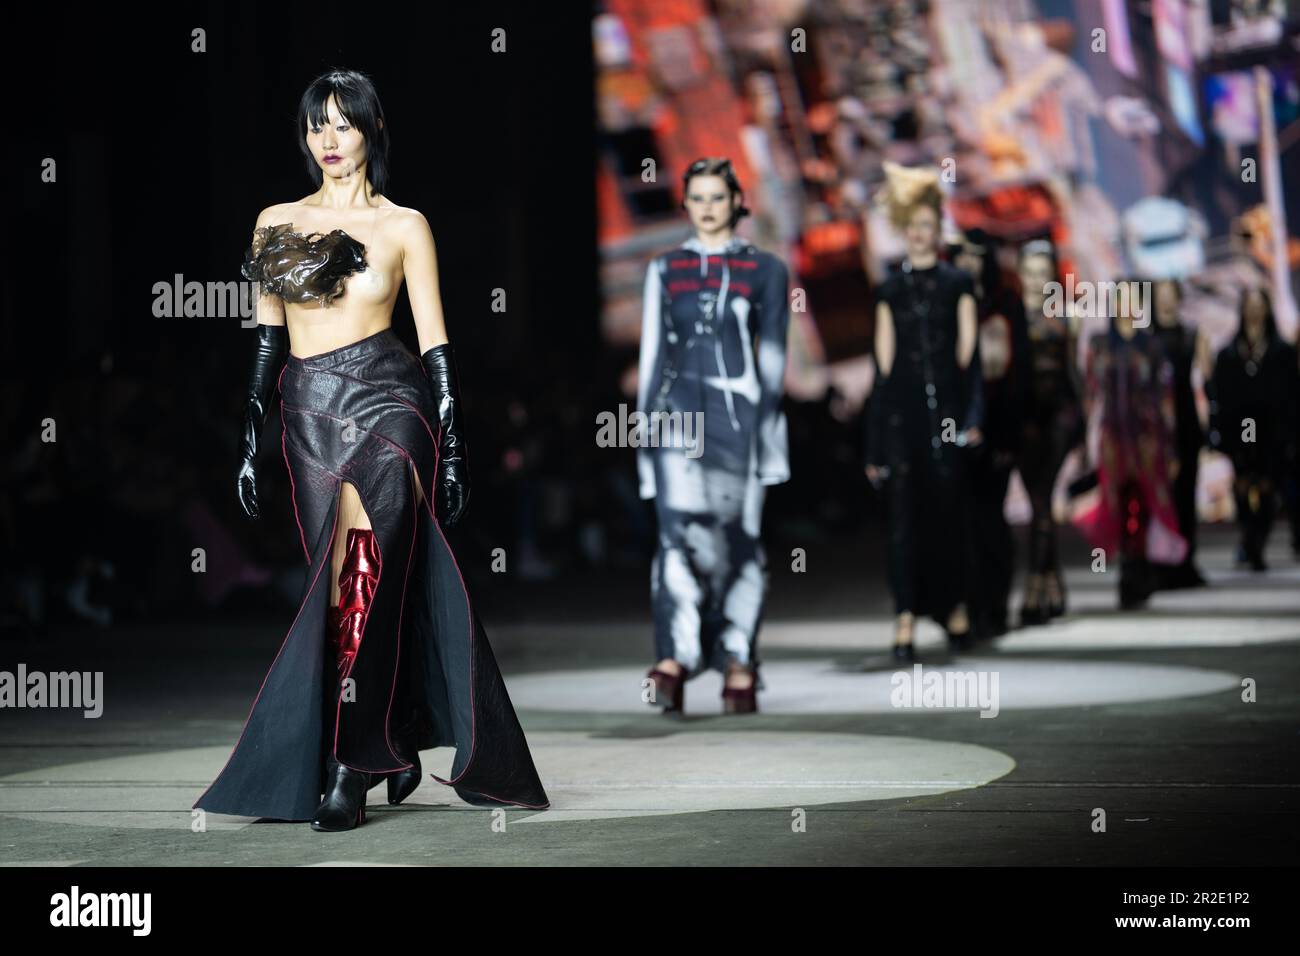 Sydney, Australia. 17th May, 2023. Models walk the runway during the INJURY show during the Afterpay Australian Fashion Week 2023 at Carriageworks on MAY 17, 2023 in Sydney, Australia Credit: IOIO IMAGES/Alamy Live News Stock Photo